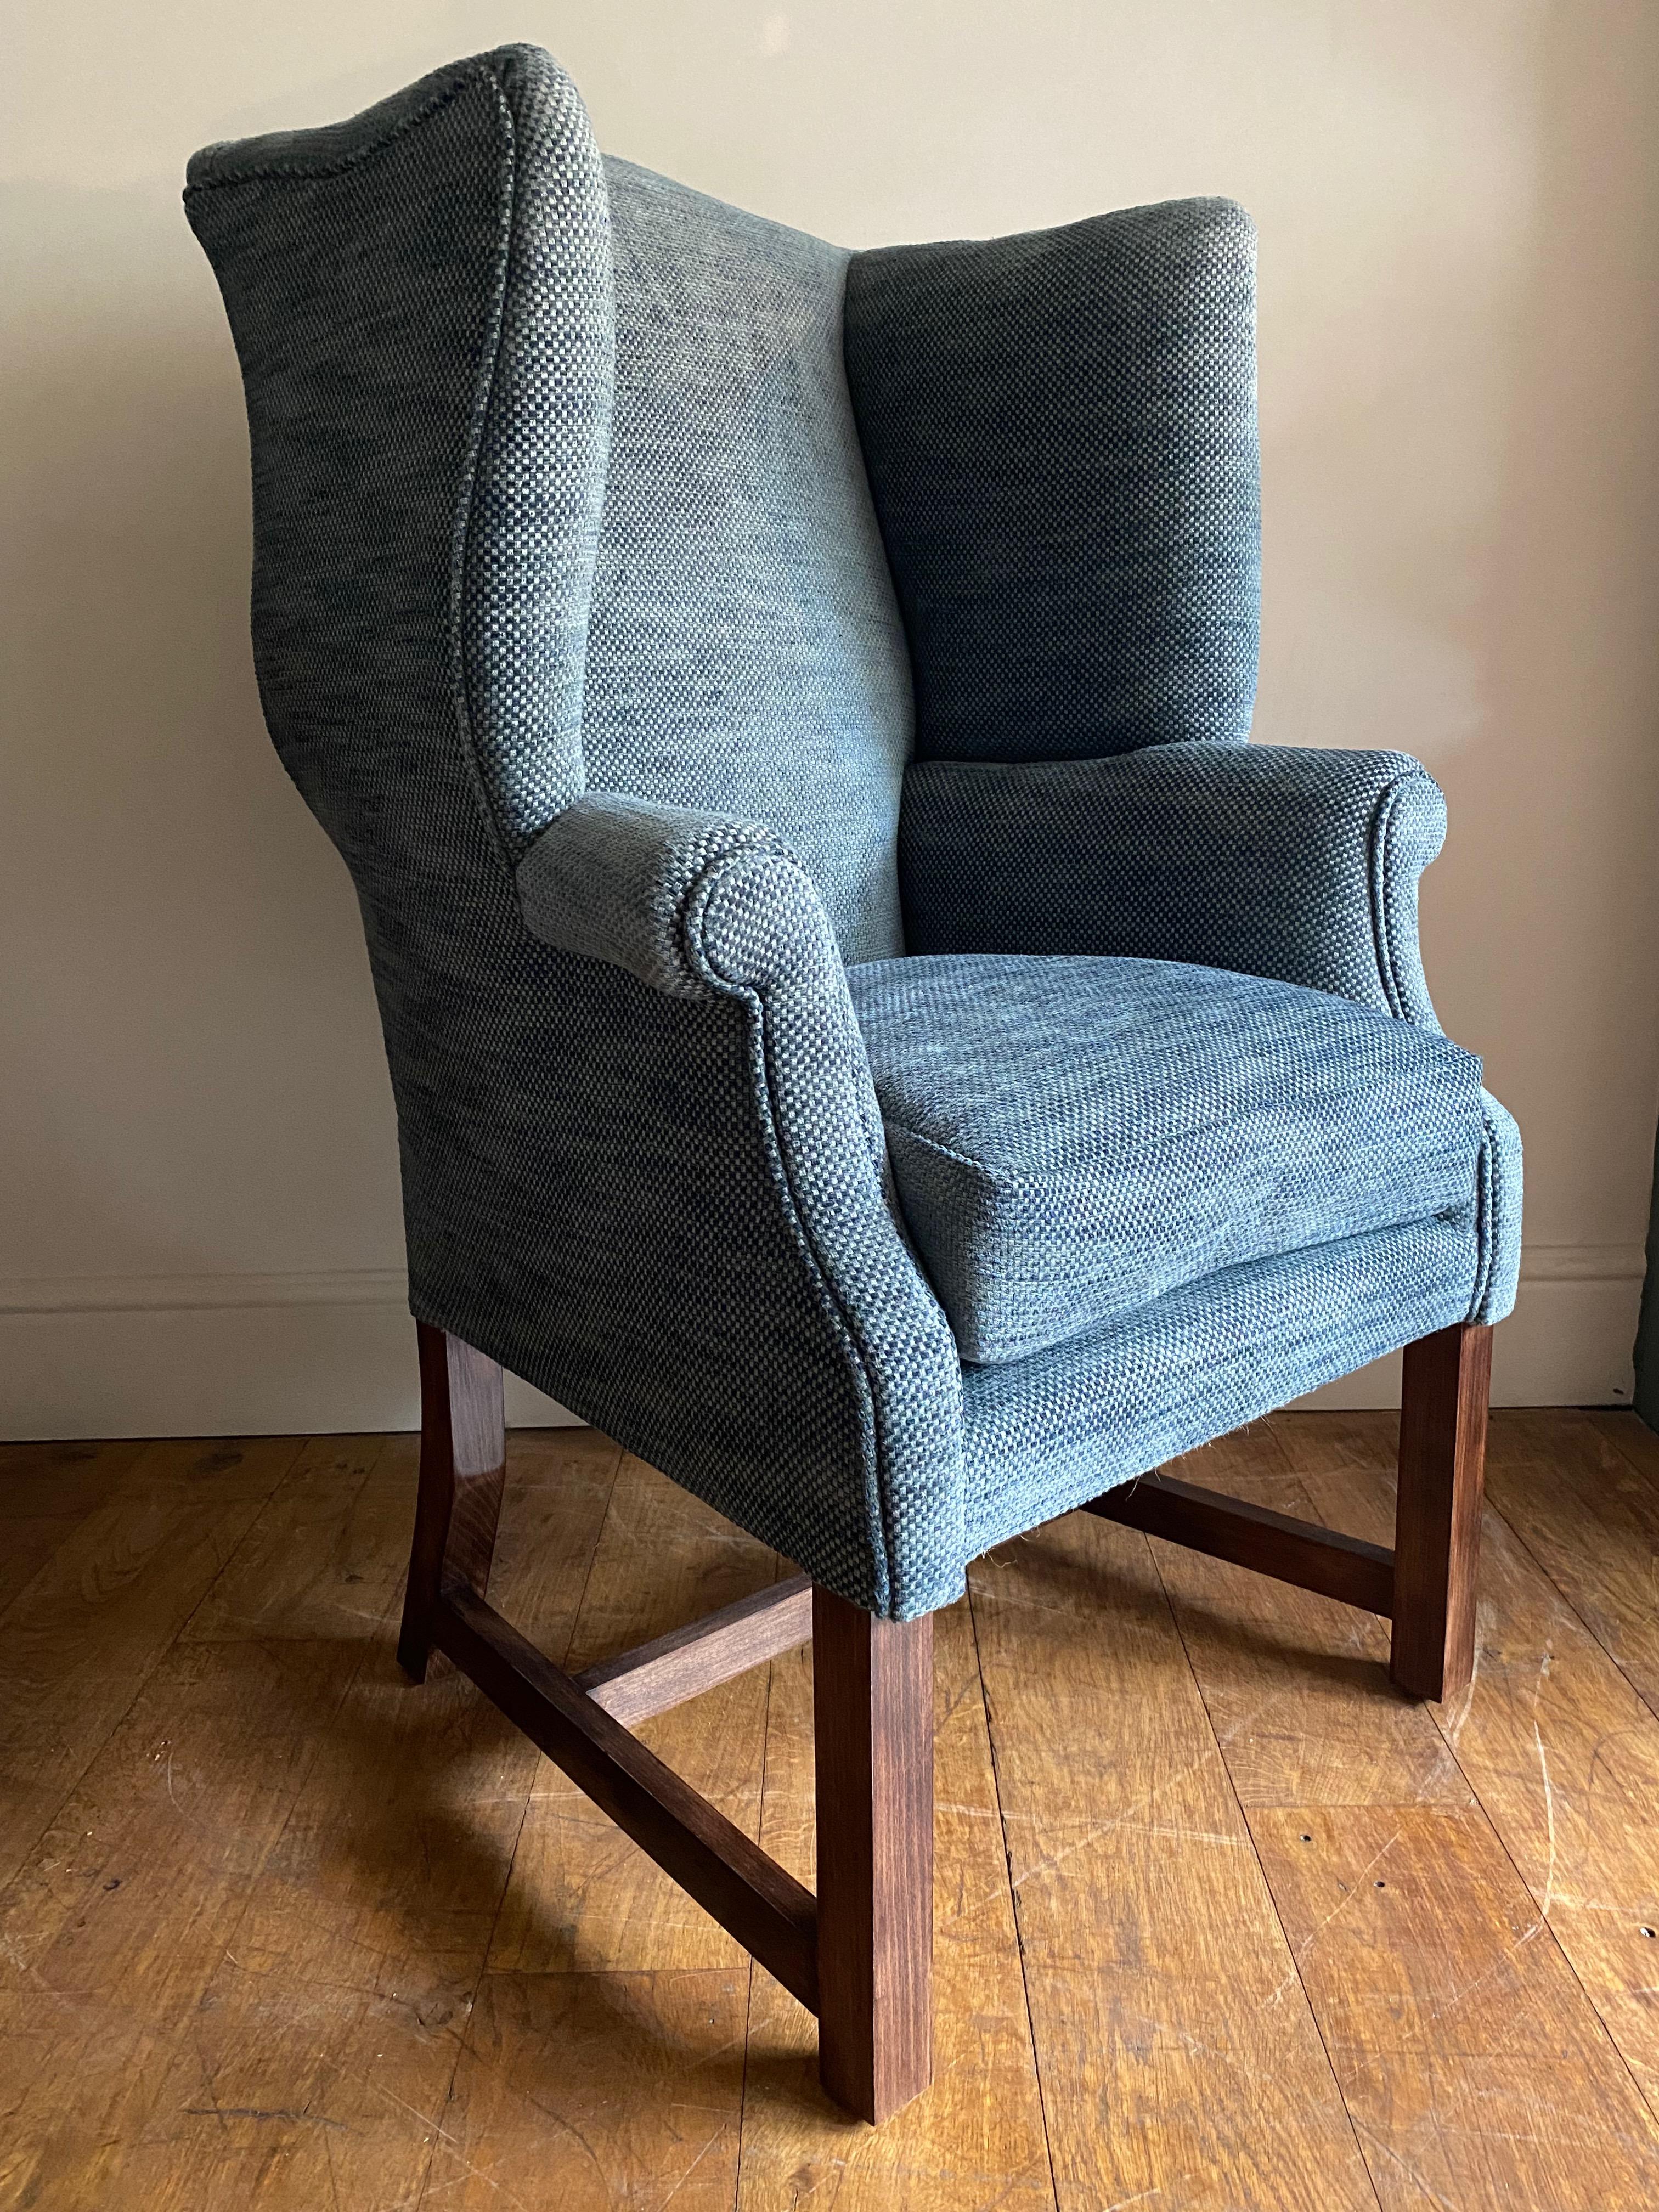 Both the frame making and upholstery are carried out within a 20 mile radius of our base in Tetbury, Gloucestershire. We use traditional methods and materials, which are carefully and sympathetically balanced with modern techniques and equipment.